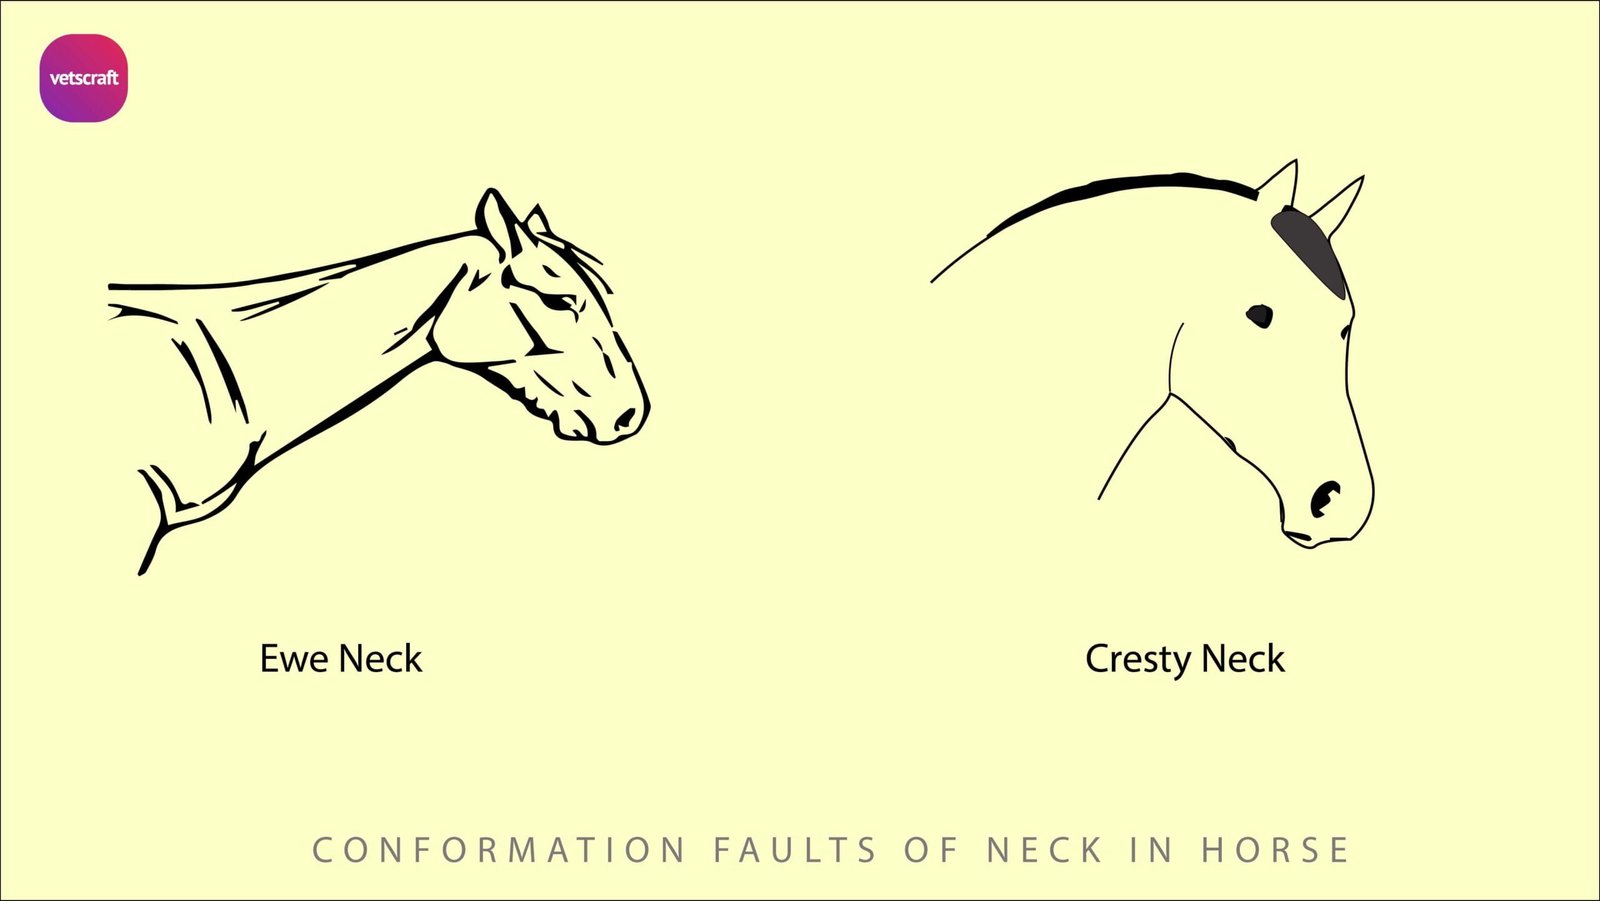 Conformation faults in horses | Equine Orthopaedics and Lameness